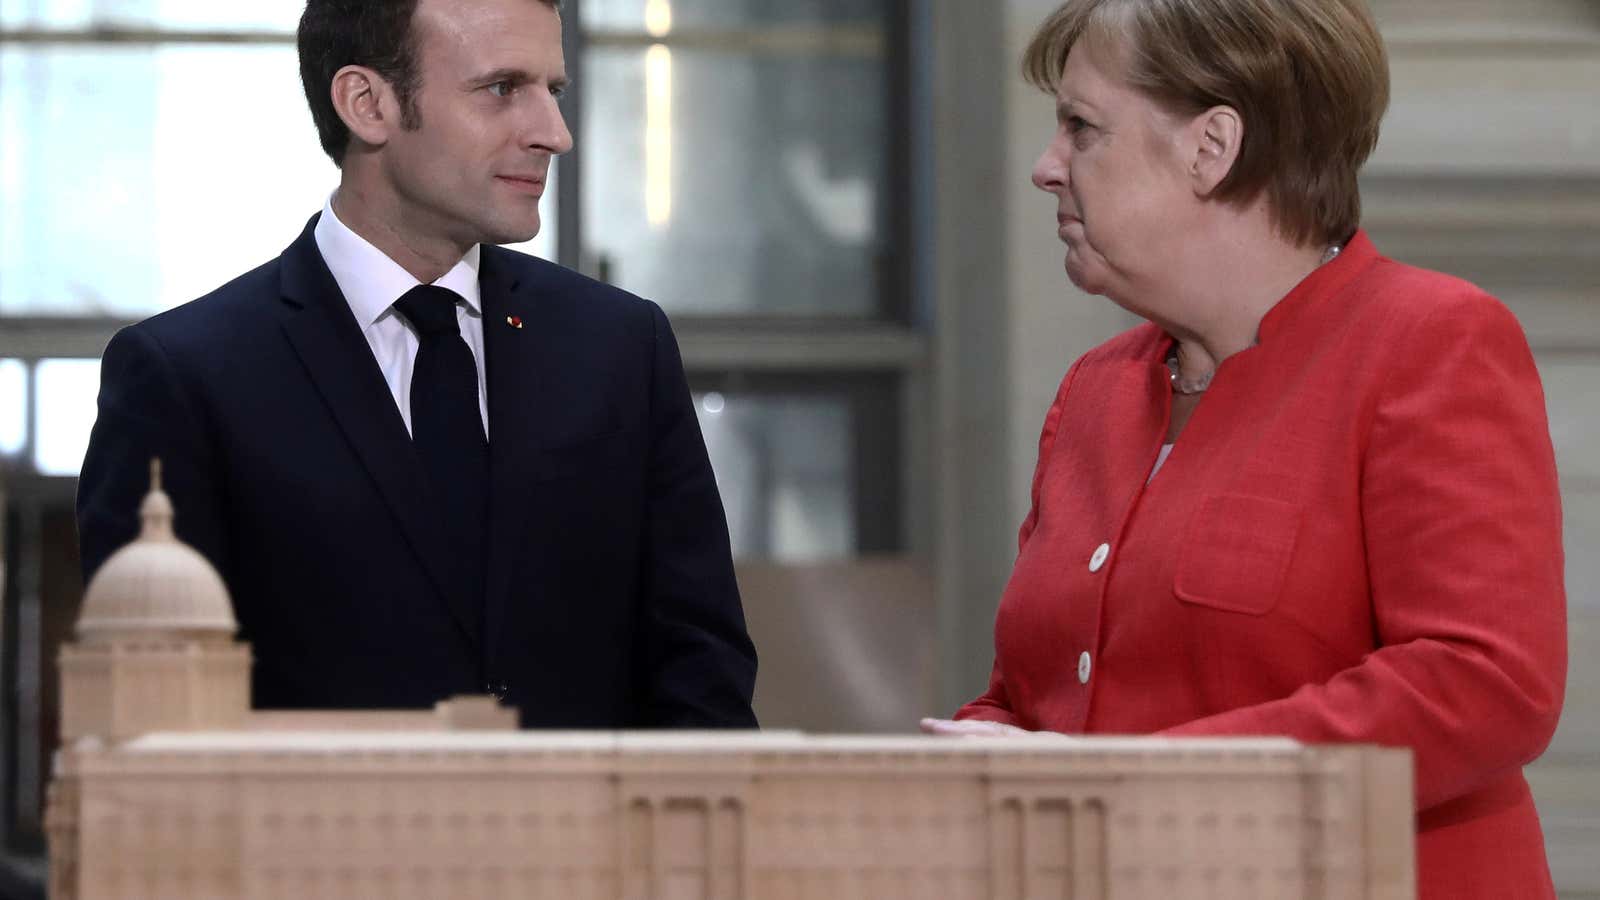 Merkel’s about to curb Macron’s enthusiasm